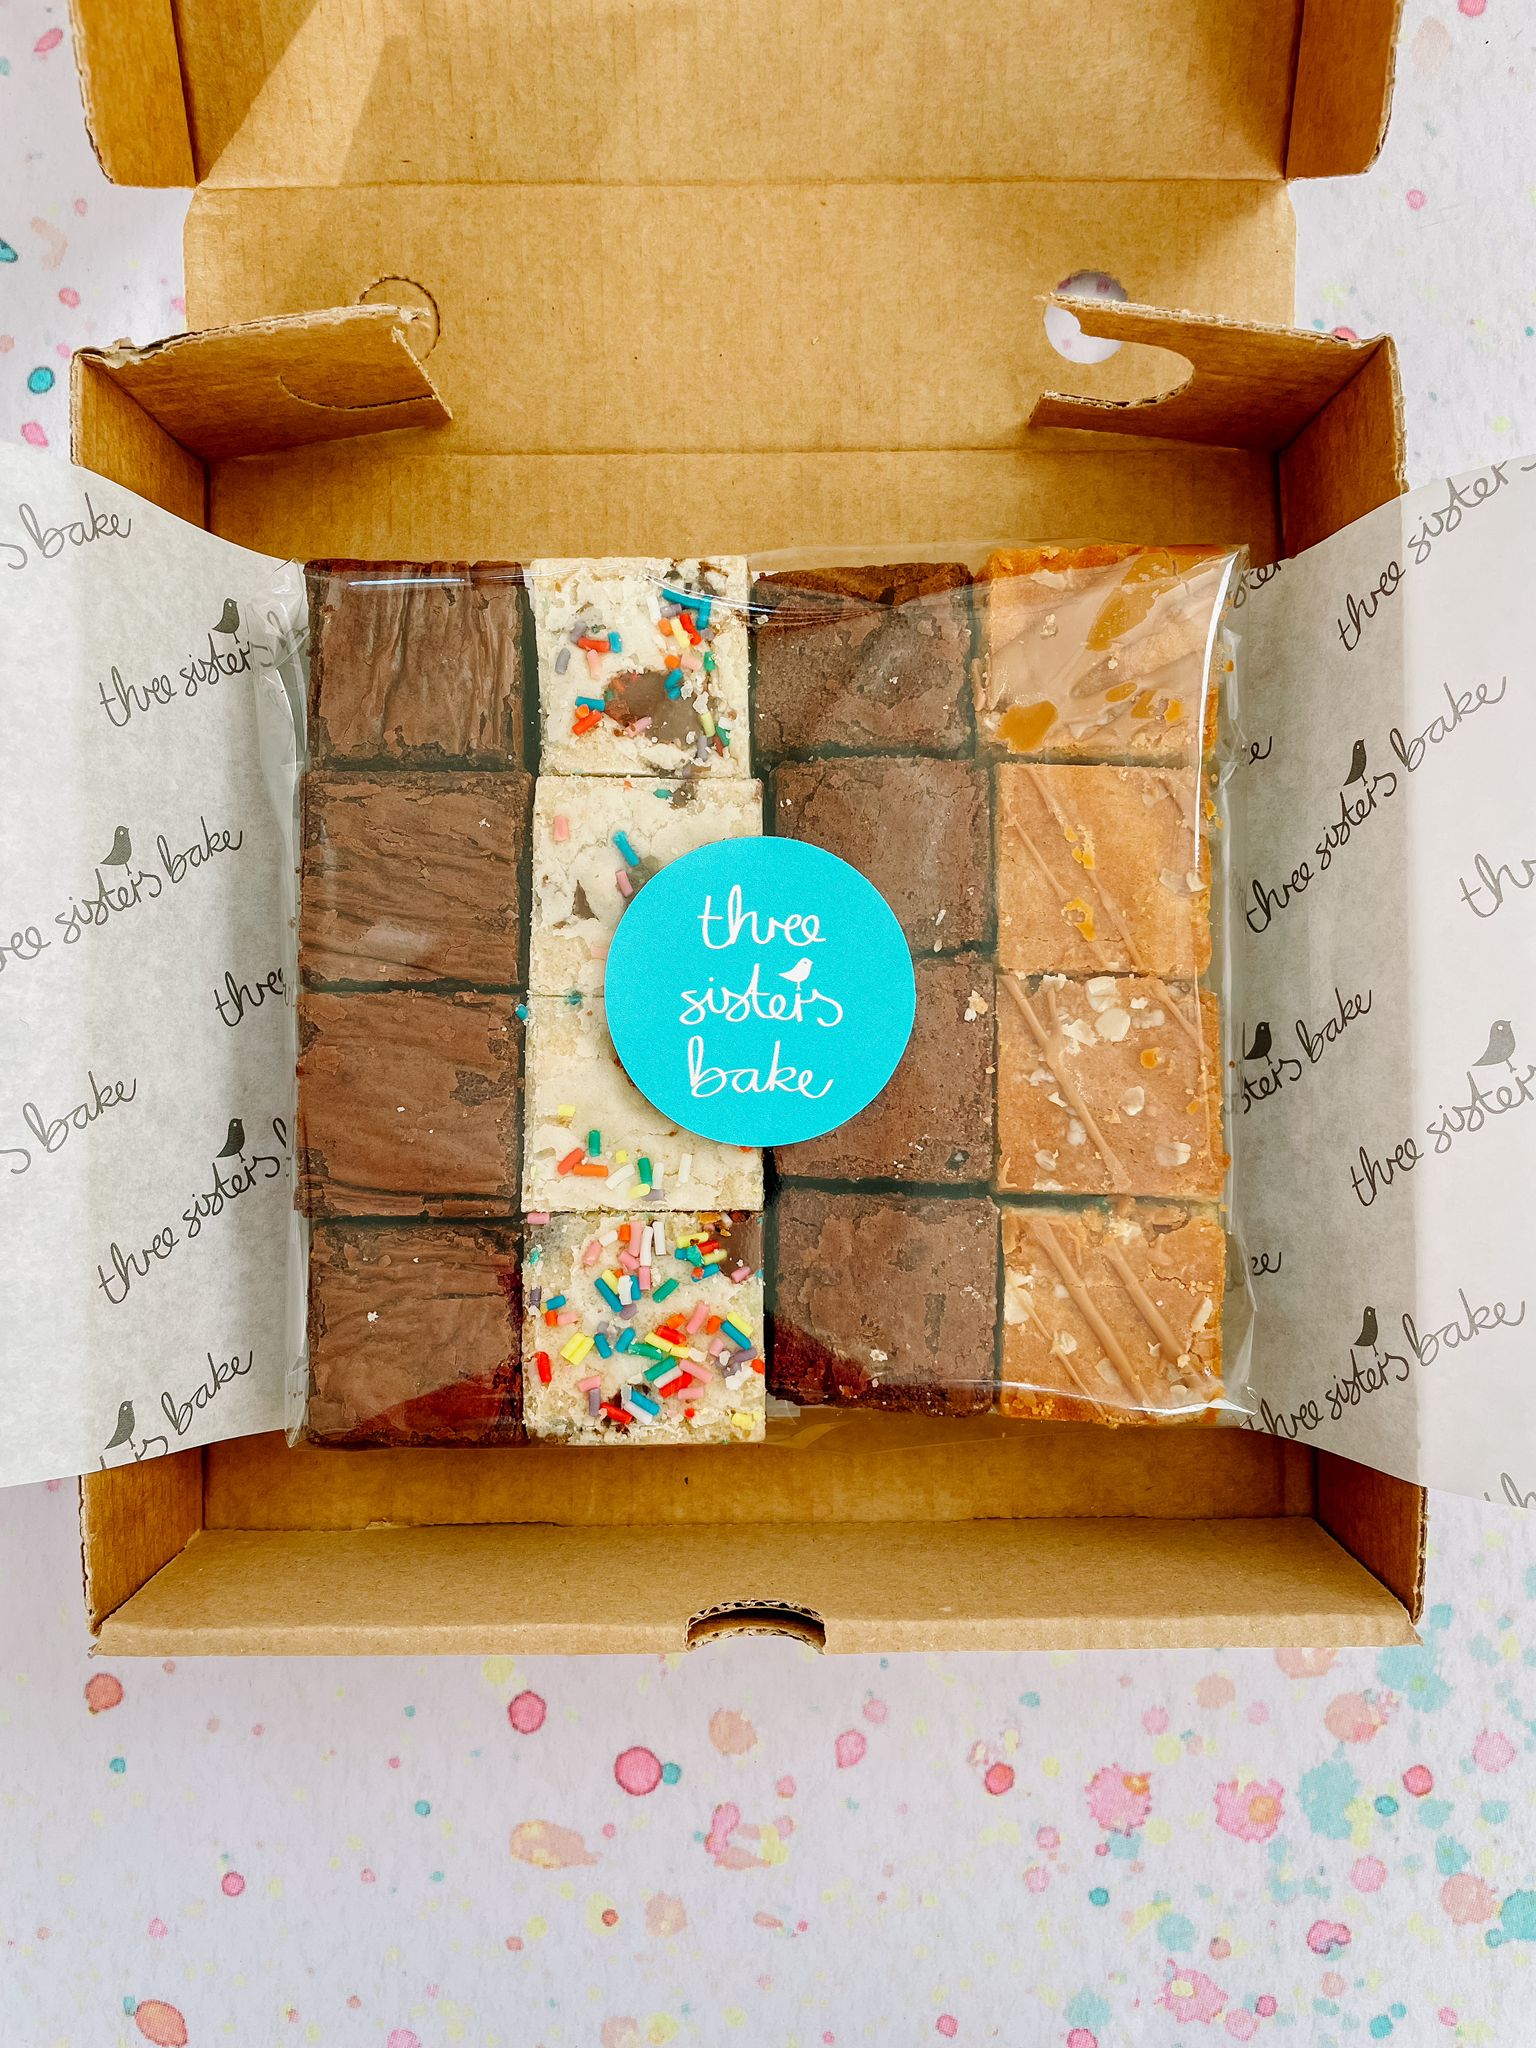 Bestsellers Cake Box – Small Image